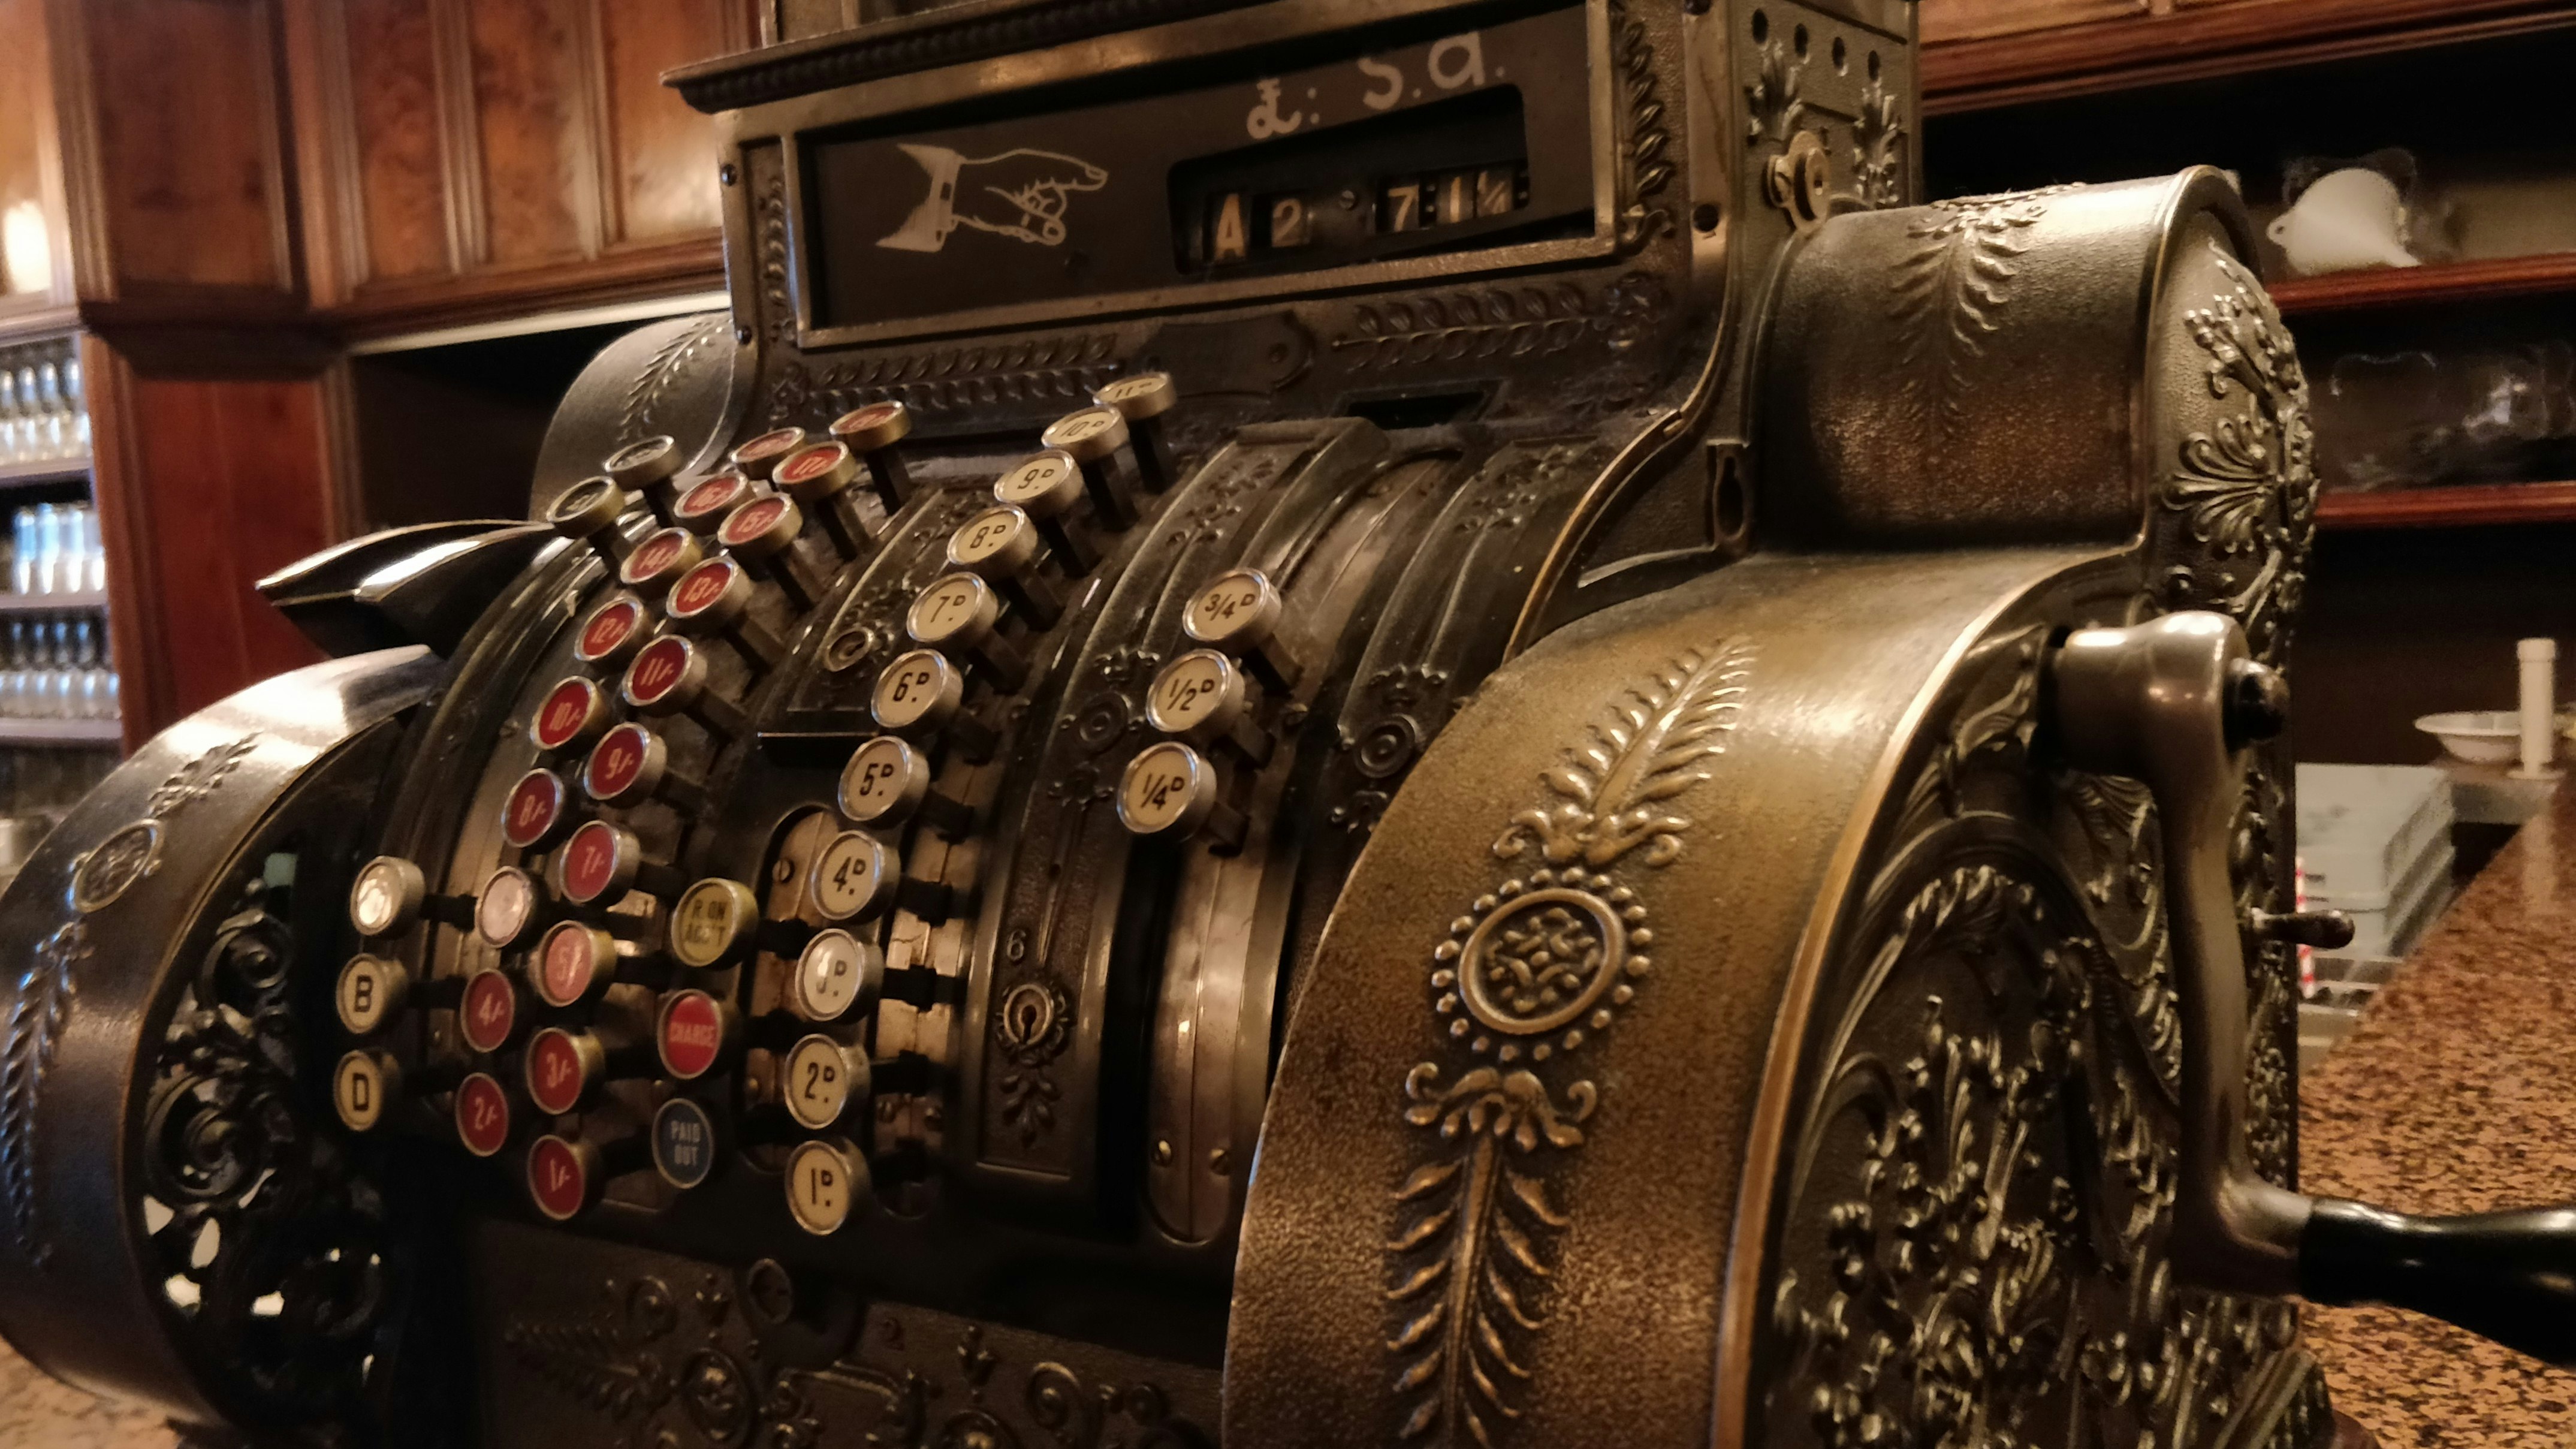 I love beautiful old machines and this cash register in a restaurant in Perth, Scotland really caught my eye. I love the voluptuousness and the detail lavished on it.